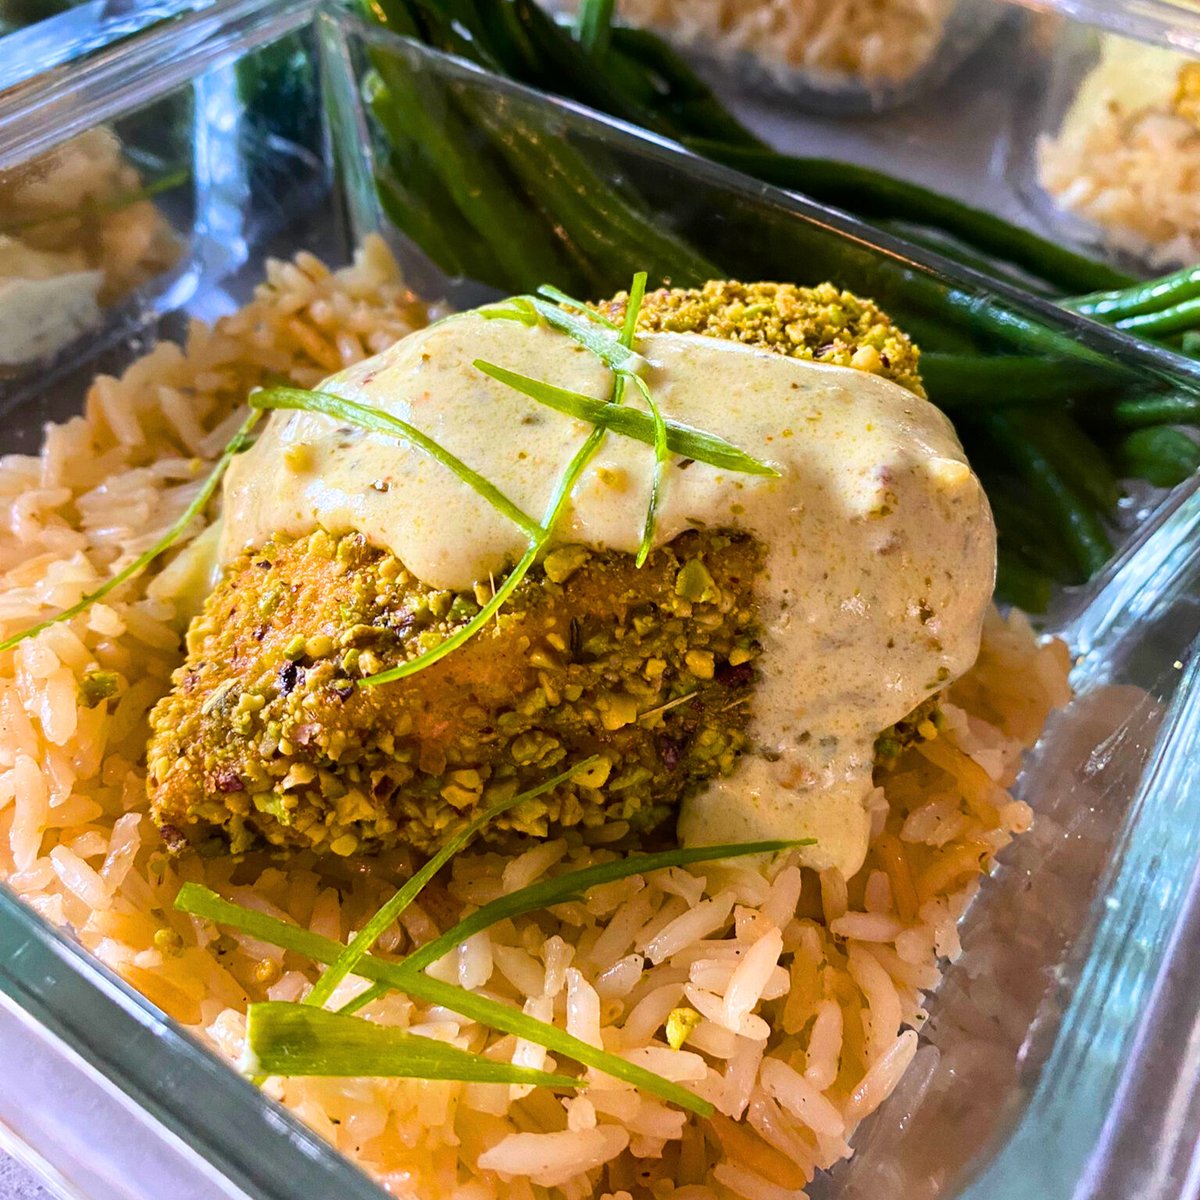 In honor of #NationalPistachioDay, check out this Pistachio Crusted Salmon served with Jasmine Rice and Green Beans! 😍 #PistachioLove #SeafoodSensation #PistachioPerfection